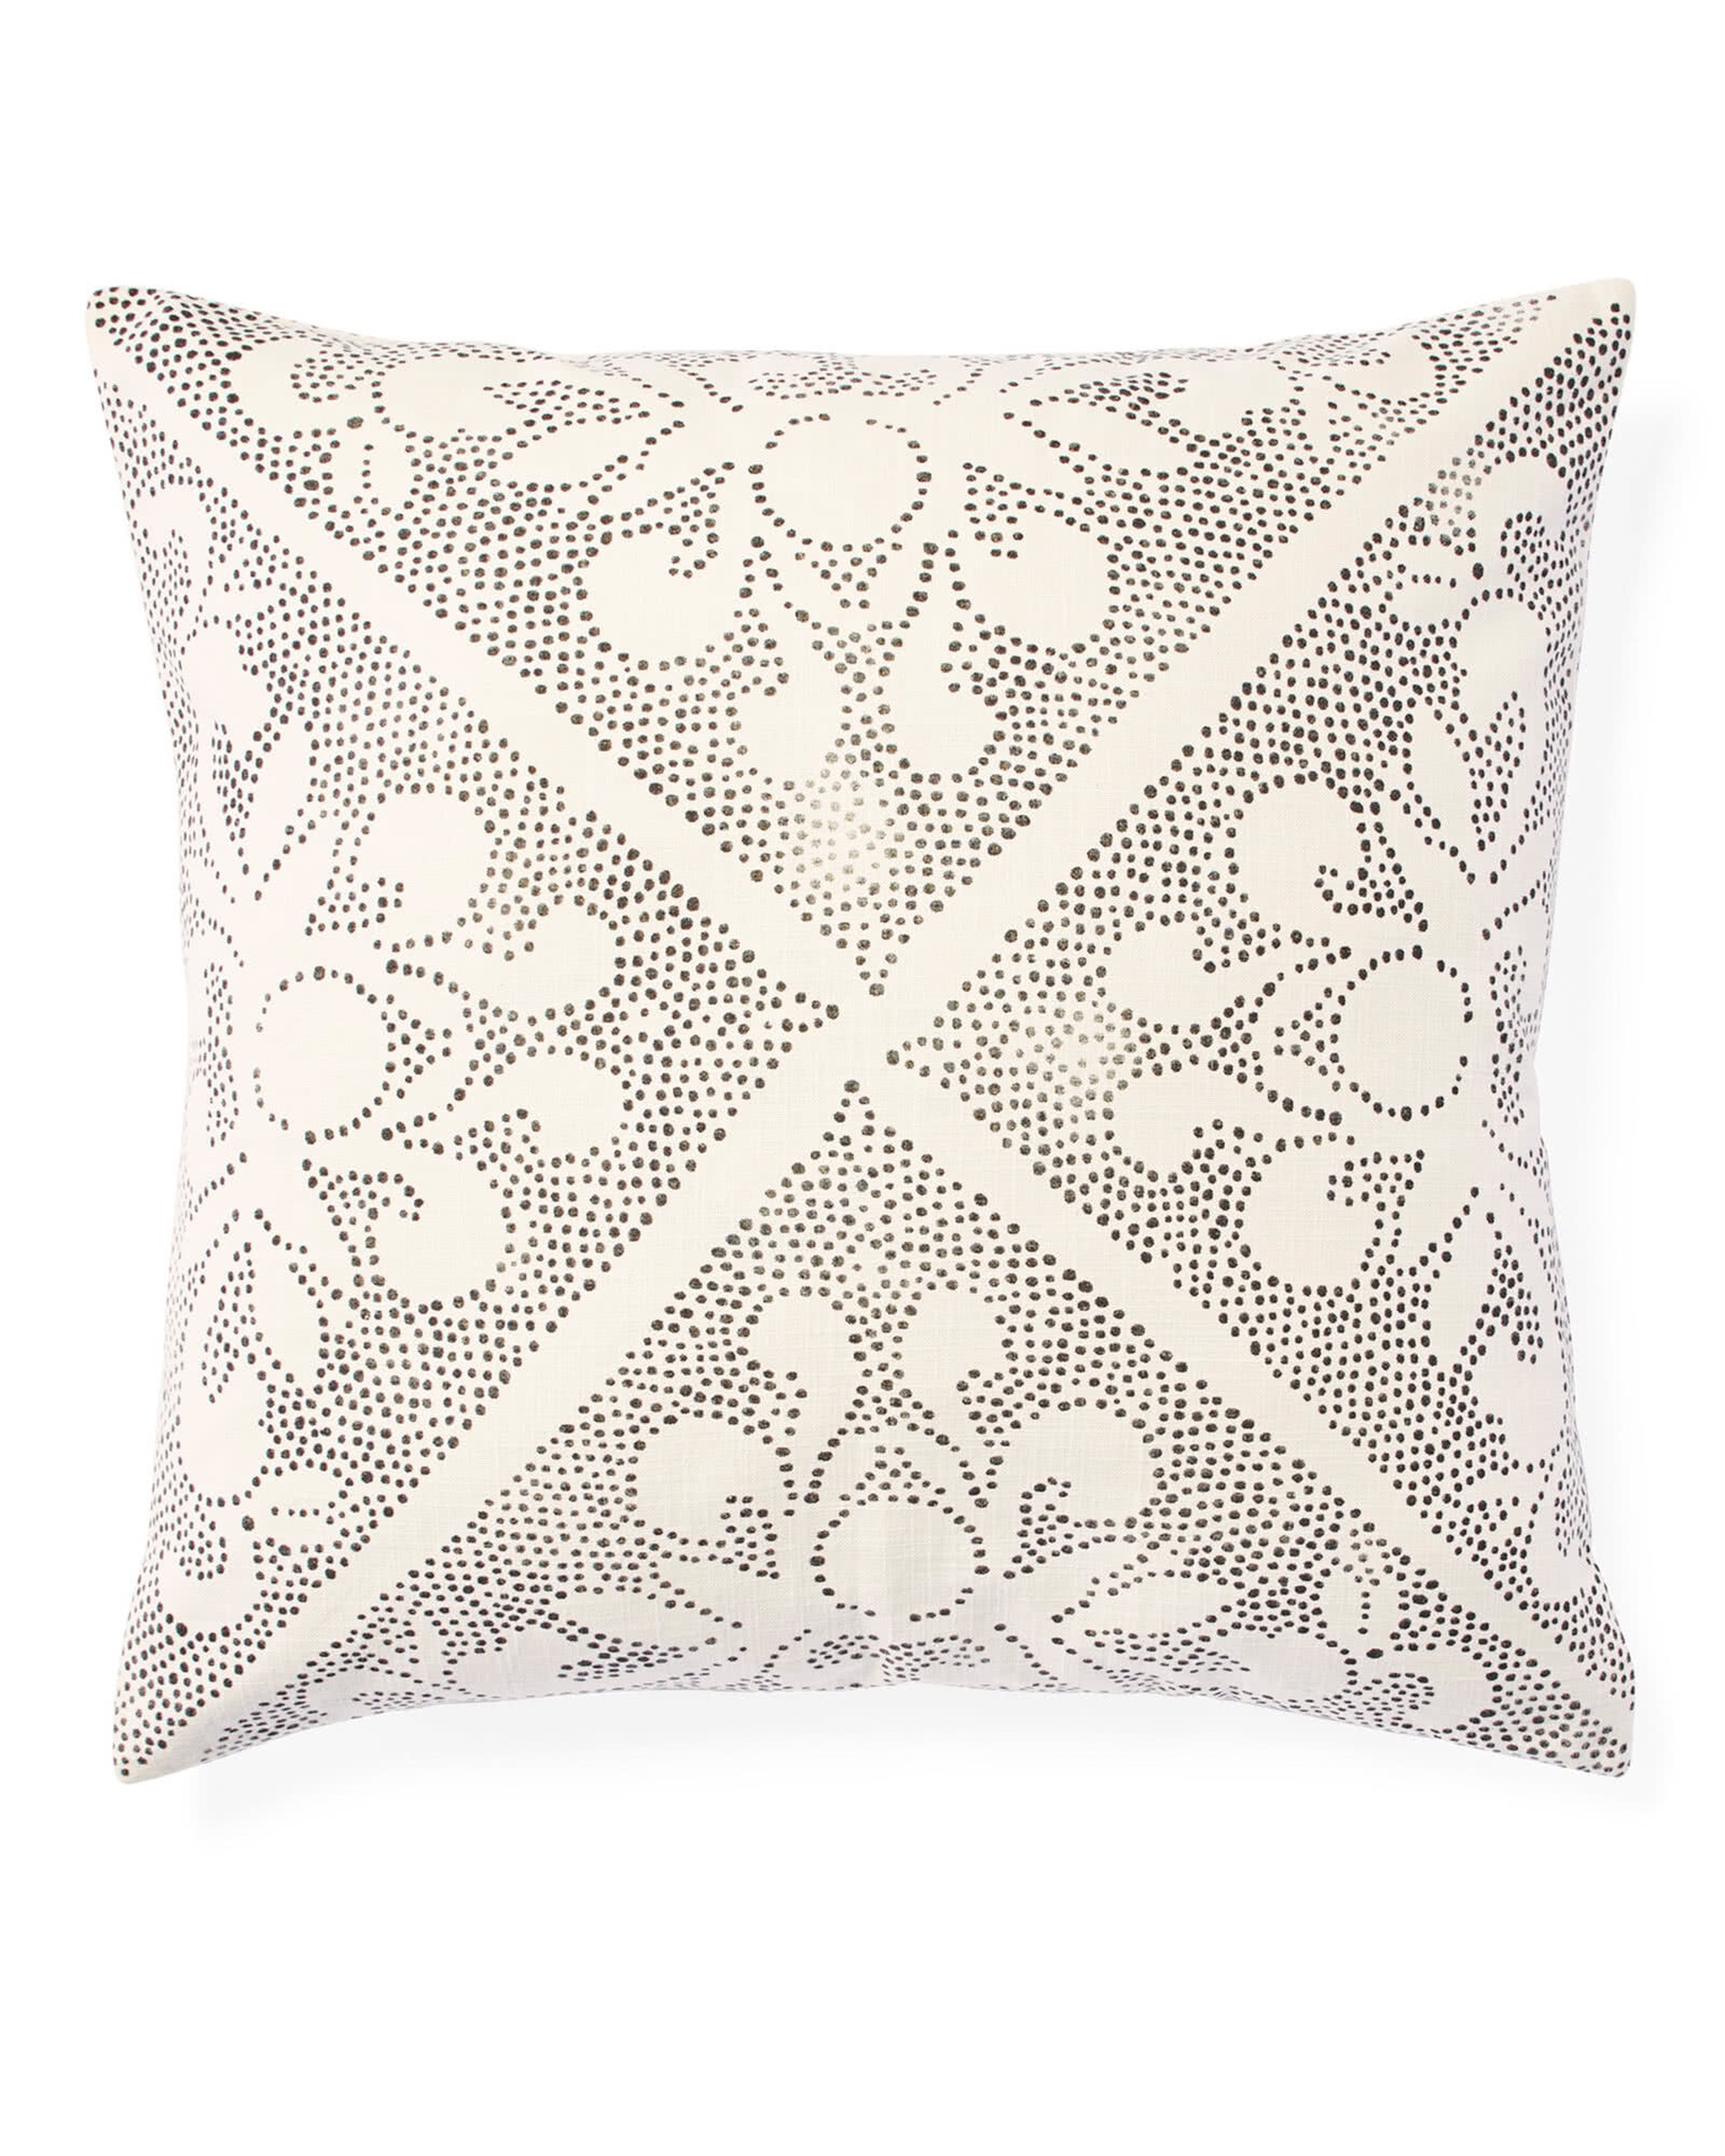 Camille Scroll Pillow Cover - Serena and Lily